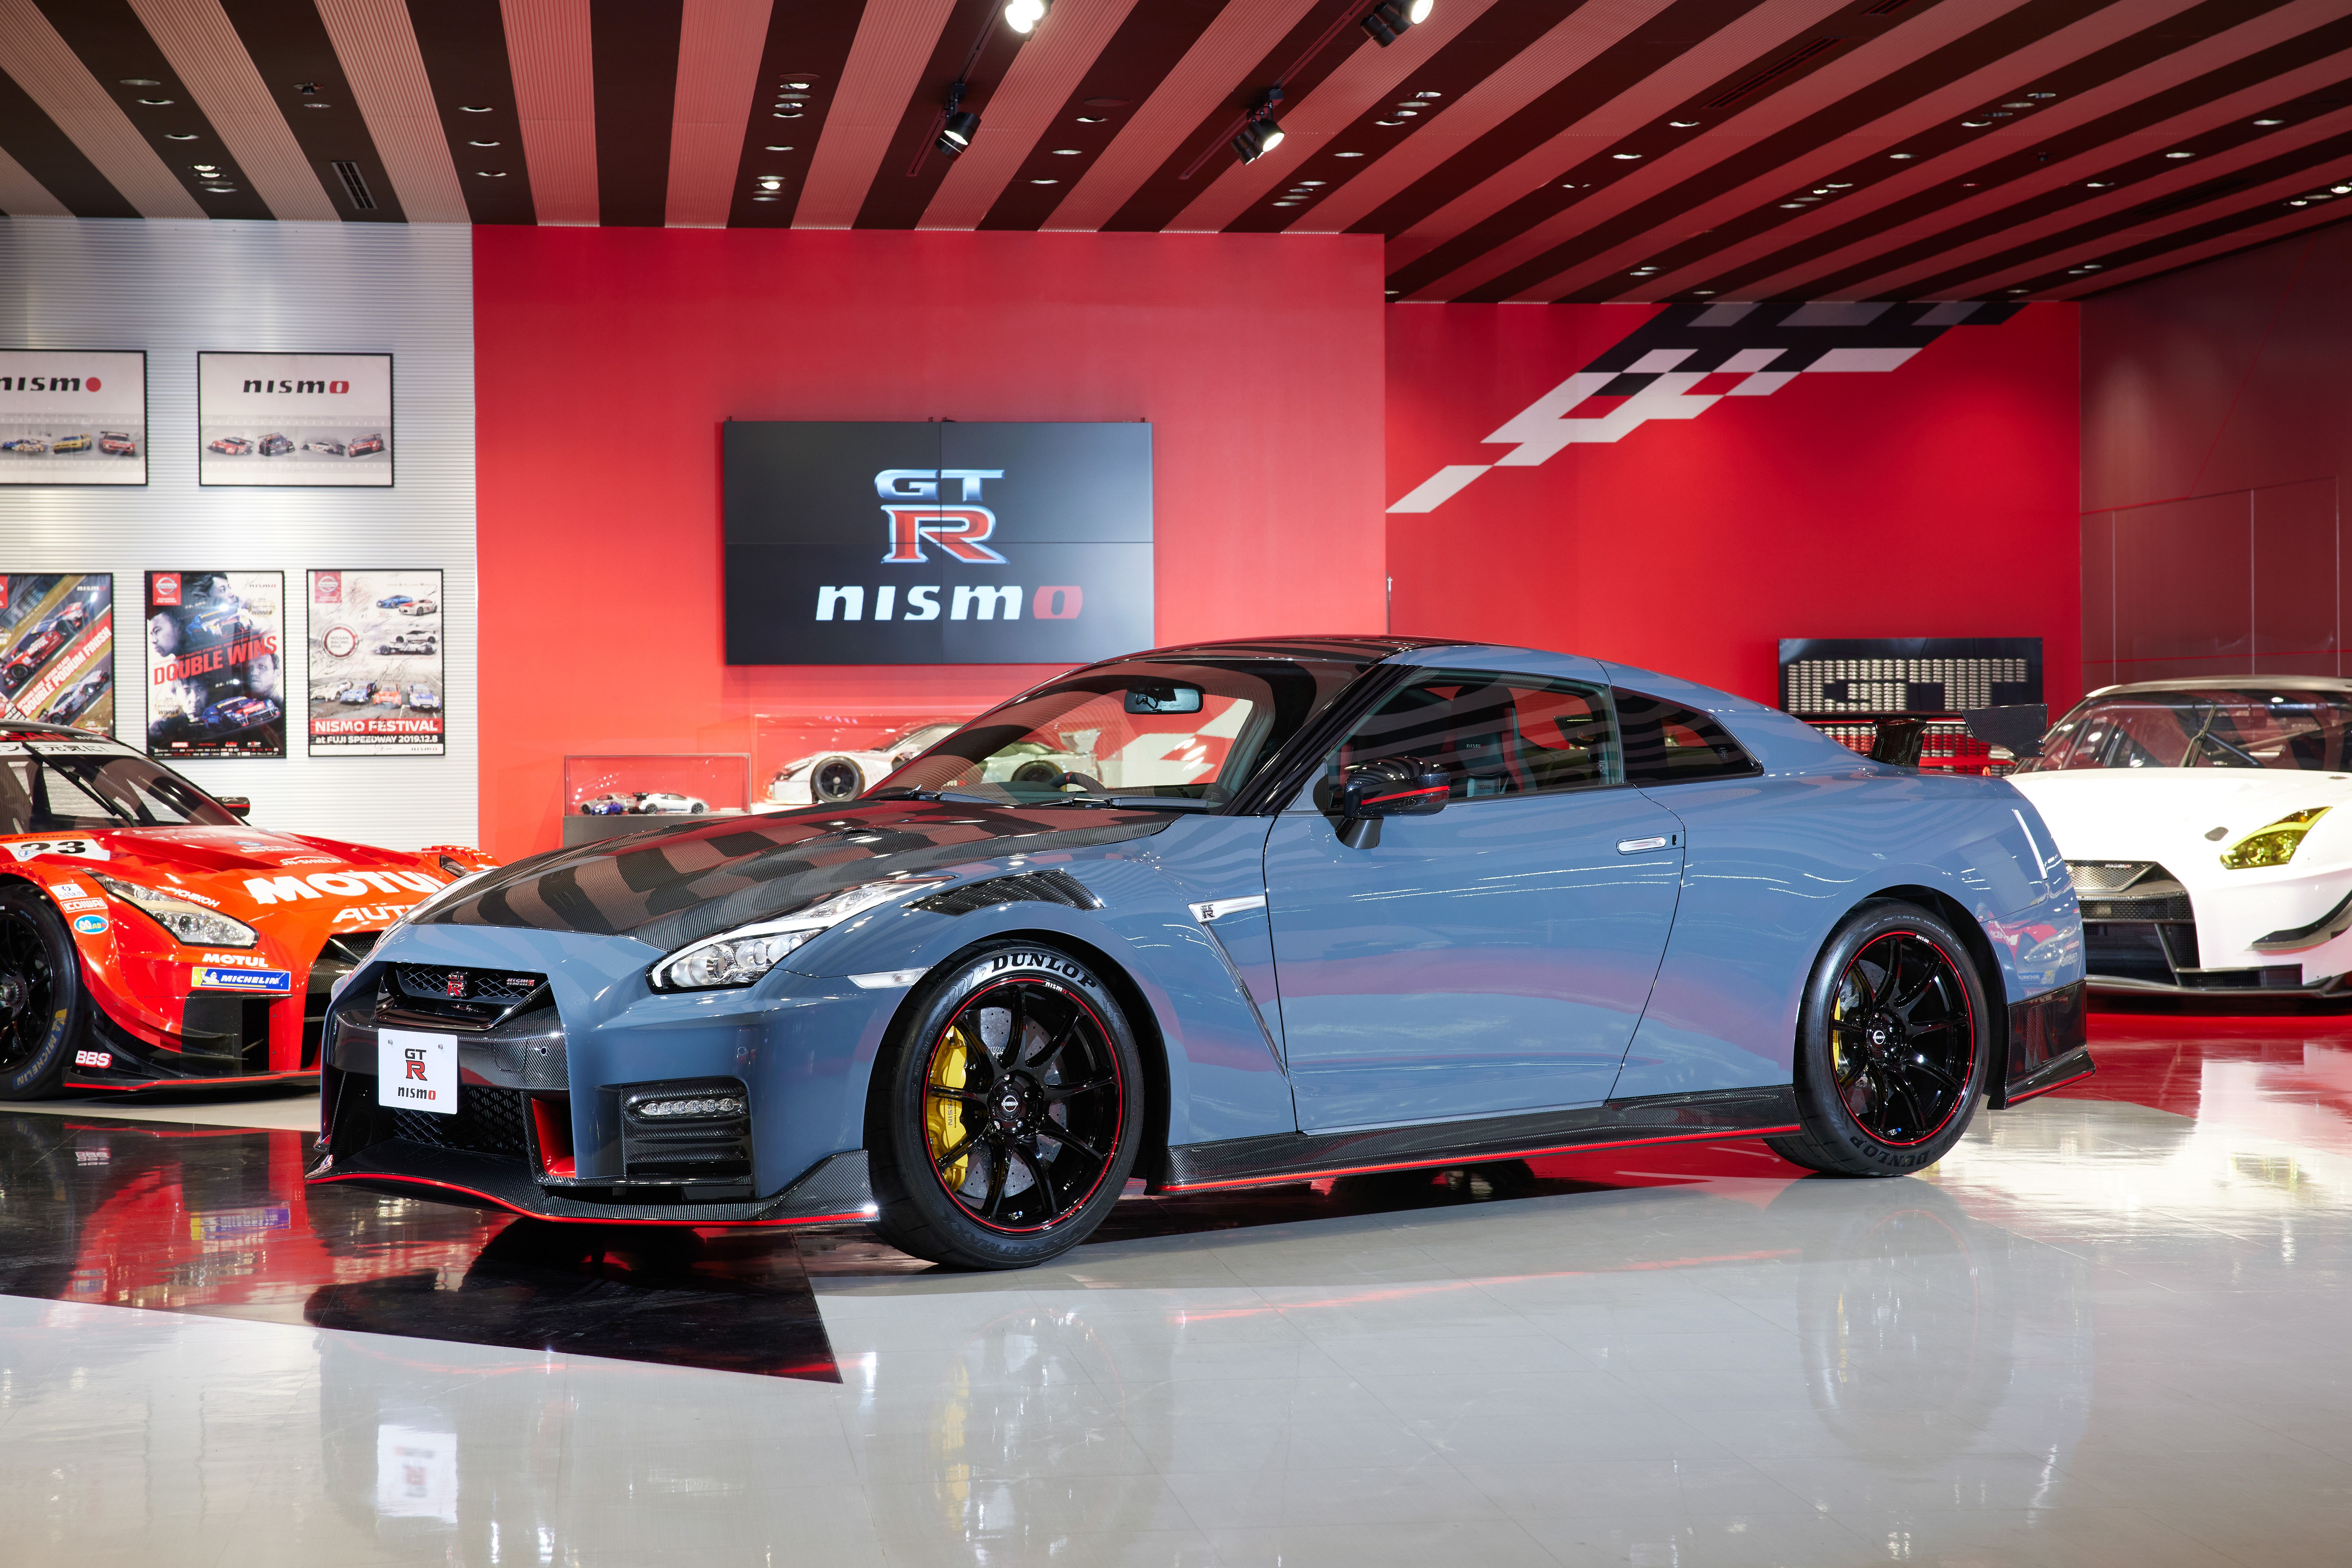 22 Nissan Gt R Nismo Special Edition Looks Tough In Stealth Gray